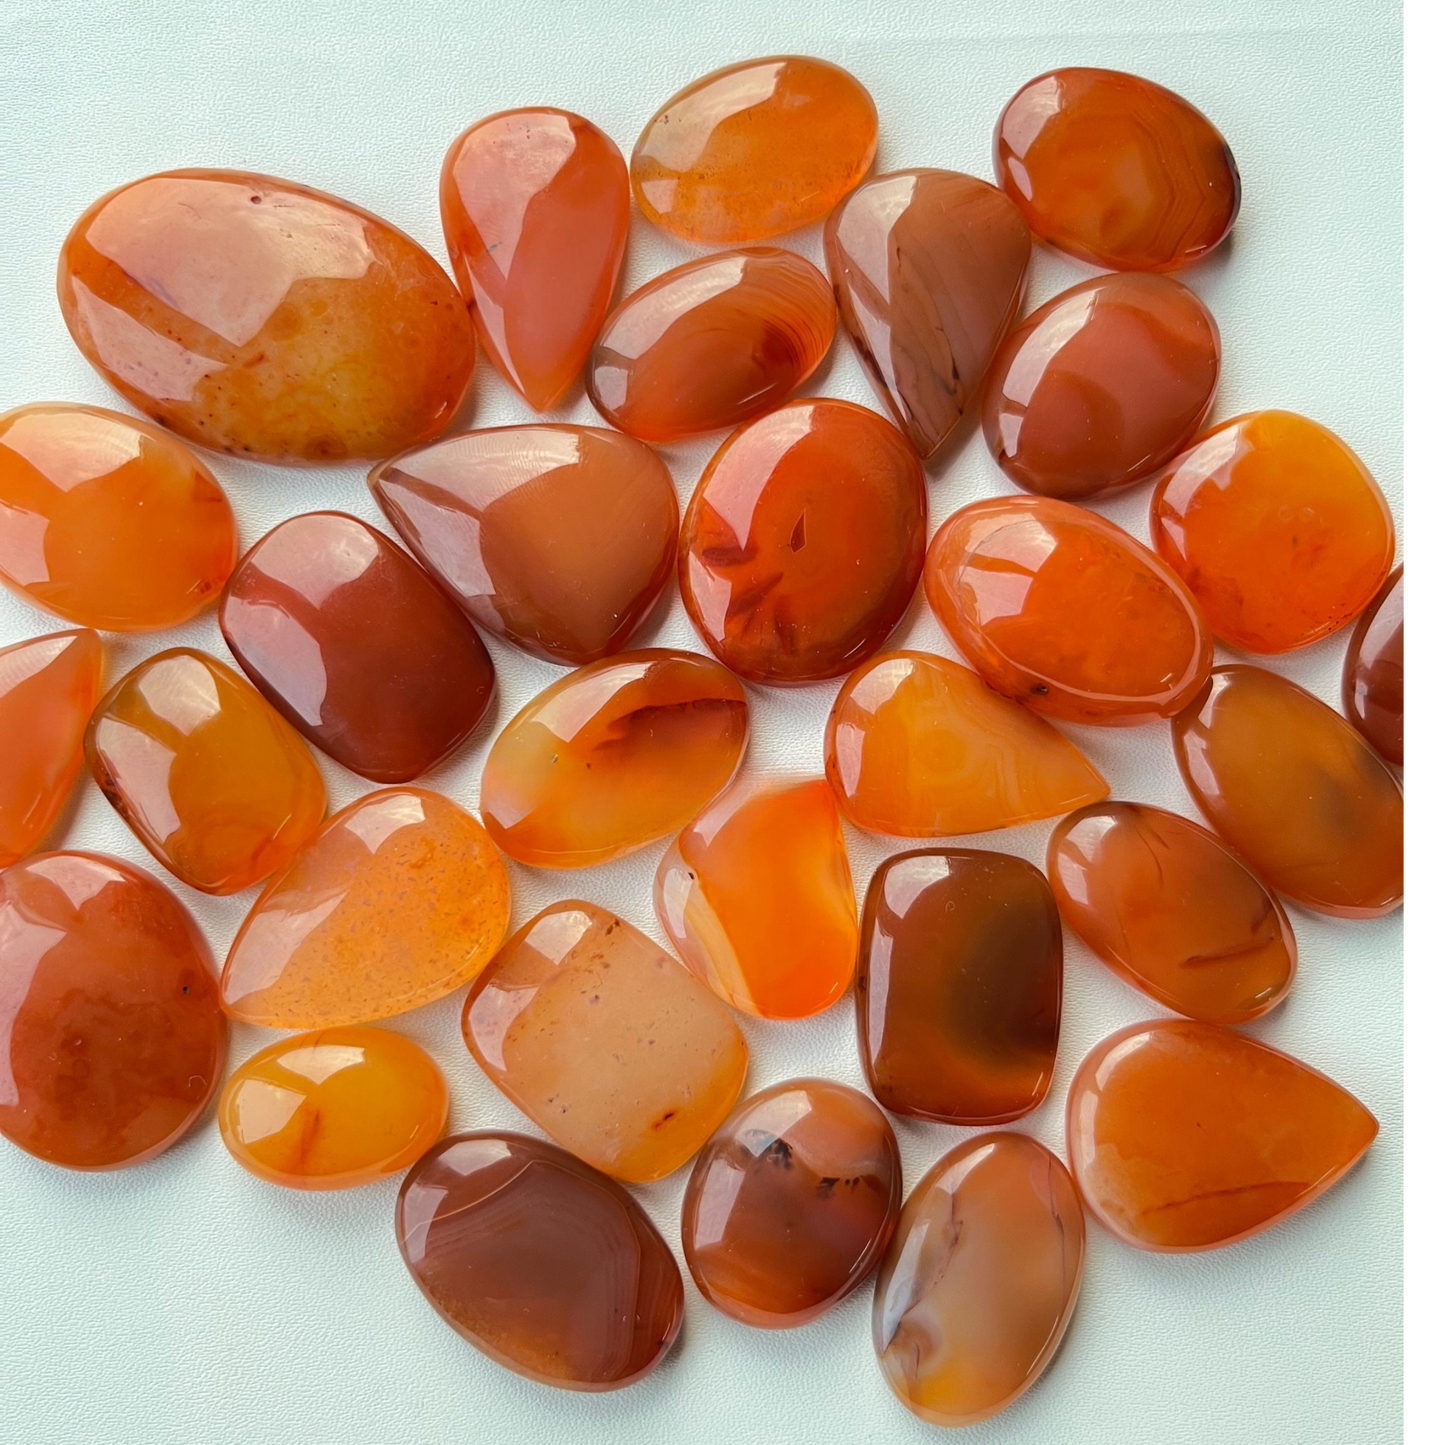 Natural Carnelian Agate Cabochon Wholesale Lot By Weight With Different Shapes And Sizes Used For Jewelry Making